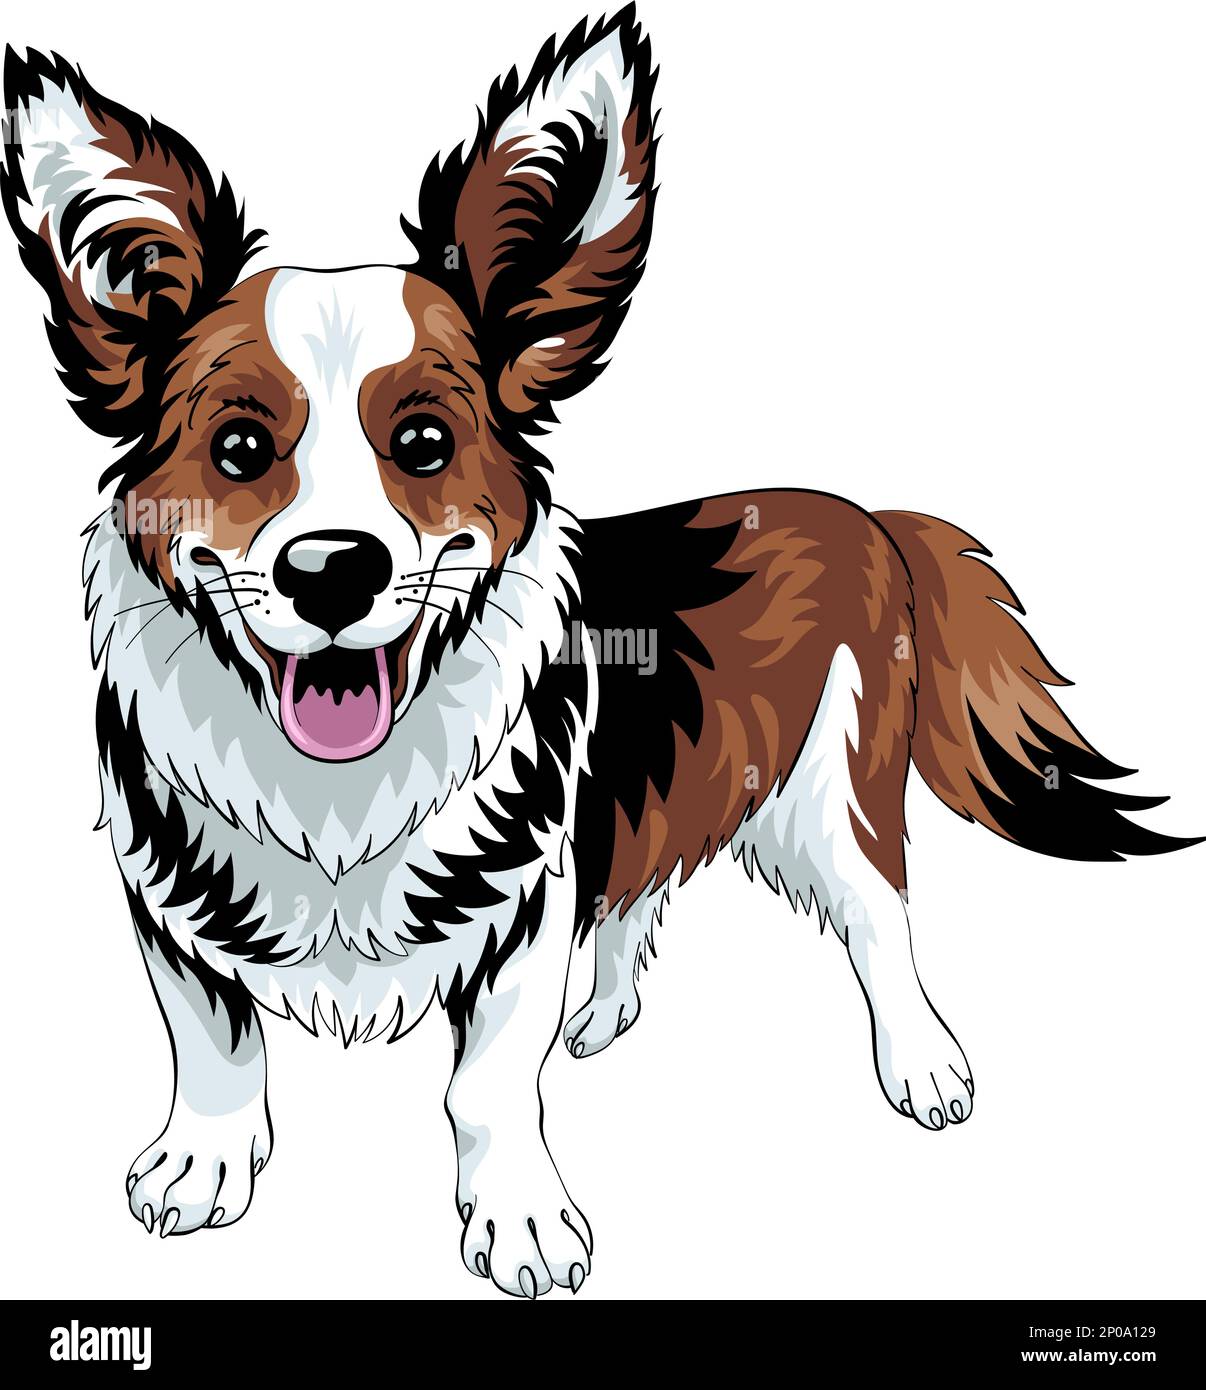 Color sketch of dog Cardigan Welsh Corgi breed staying and smiling, black and tan with white markings Stock Vector